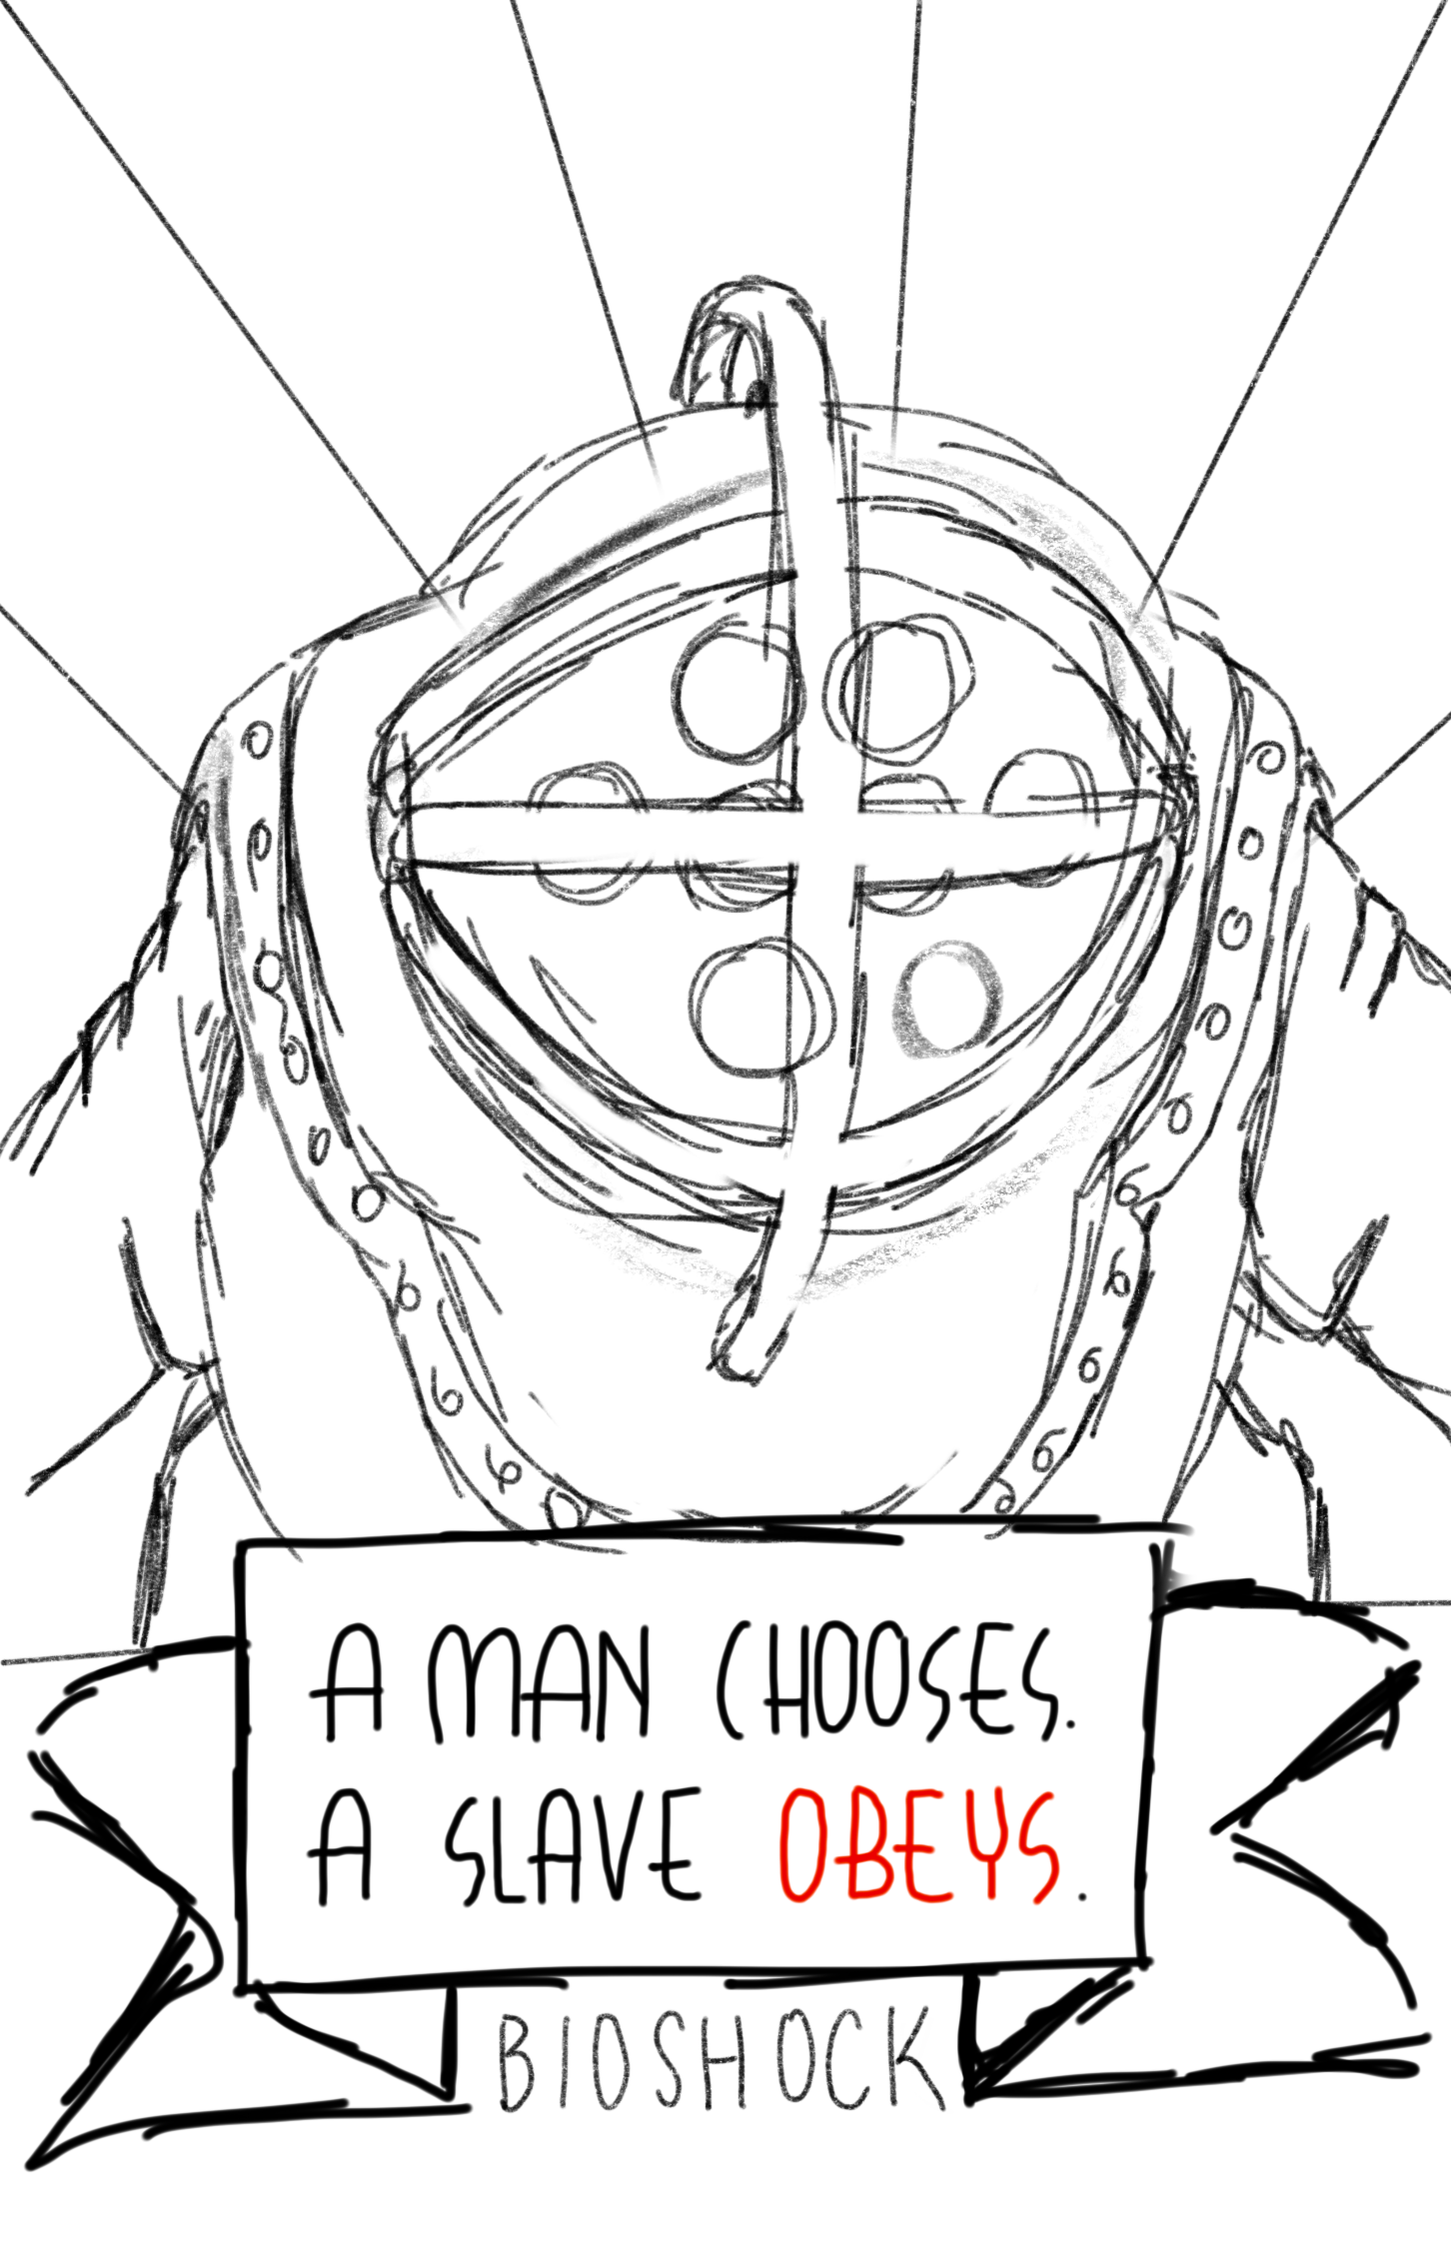 Big Daddy poster sketch with a quote from the game at the bottom in a banner and the game title below the banner